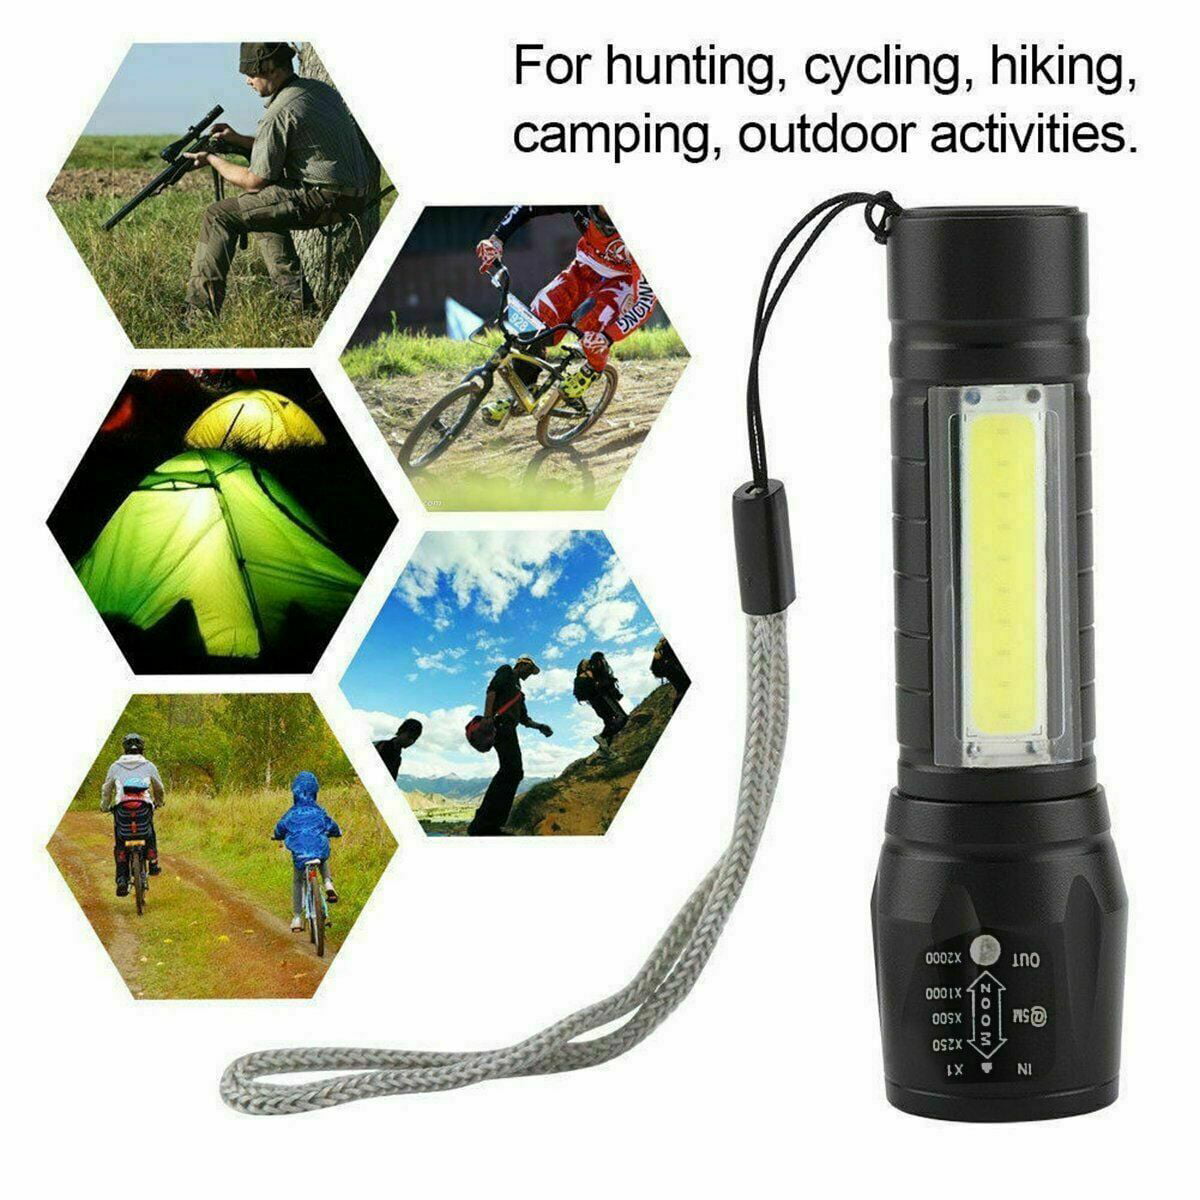 LED-Torch USB Rechargeable Small Flashlight Zoomable Camping Hiking Lamp 